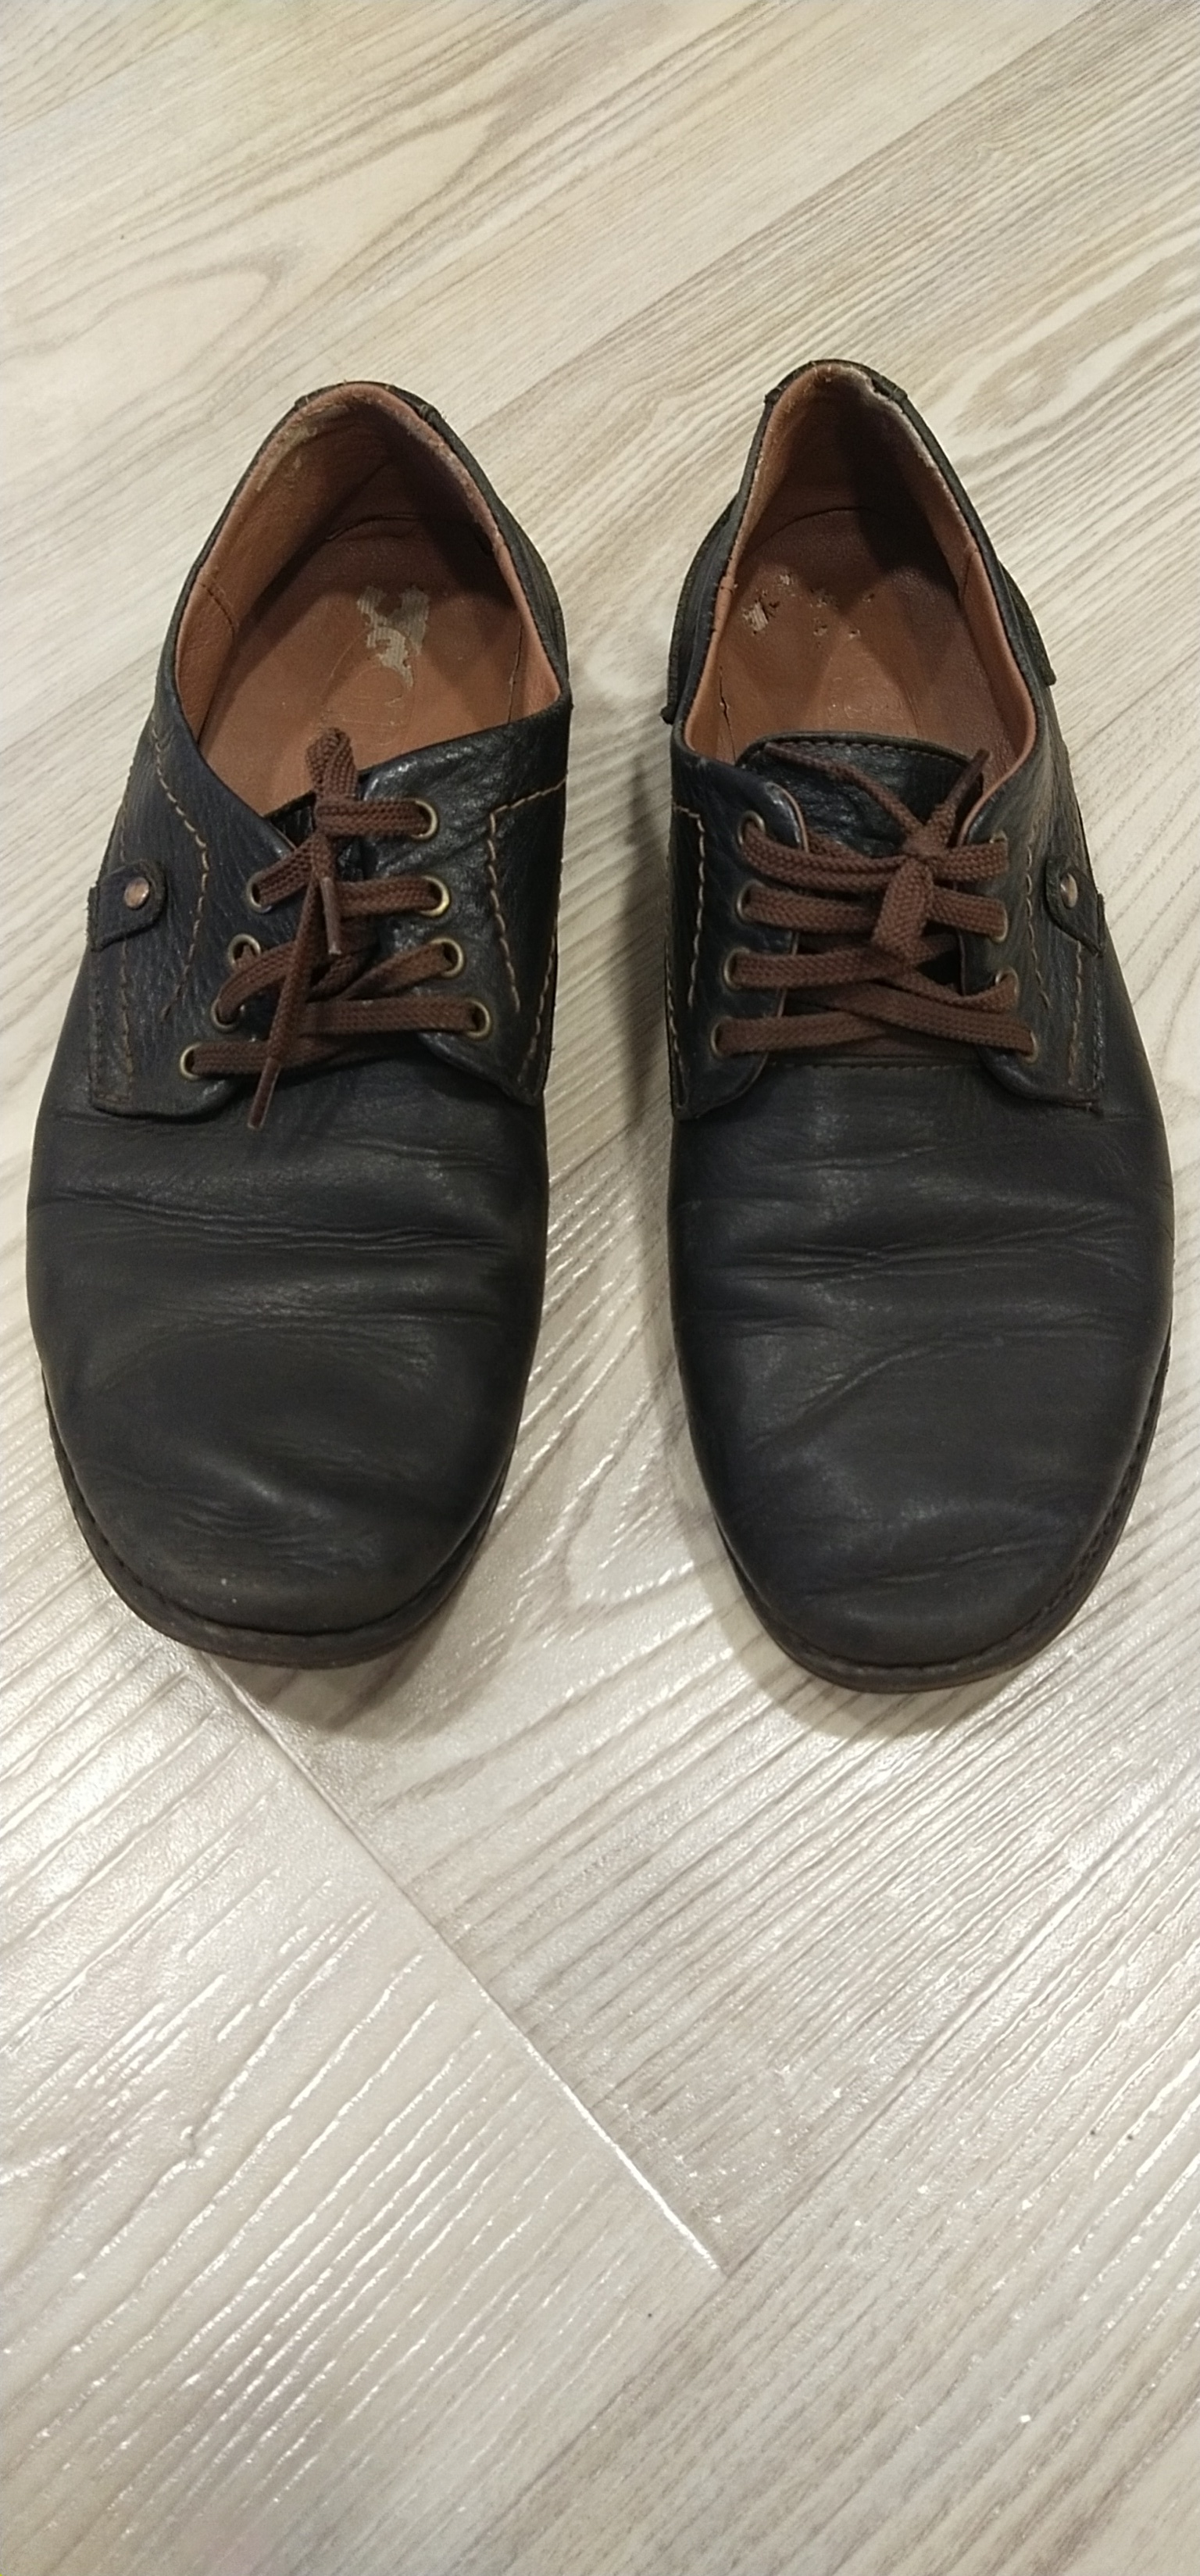 My wife wanted to throw away my shoes. - My, Second Life, Leather shoes, Saving, Longpost, 